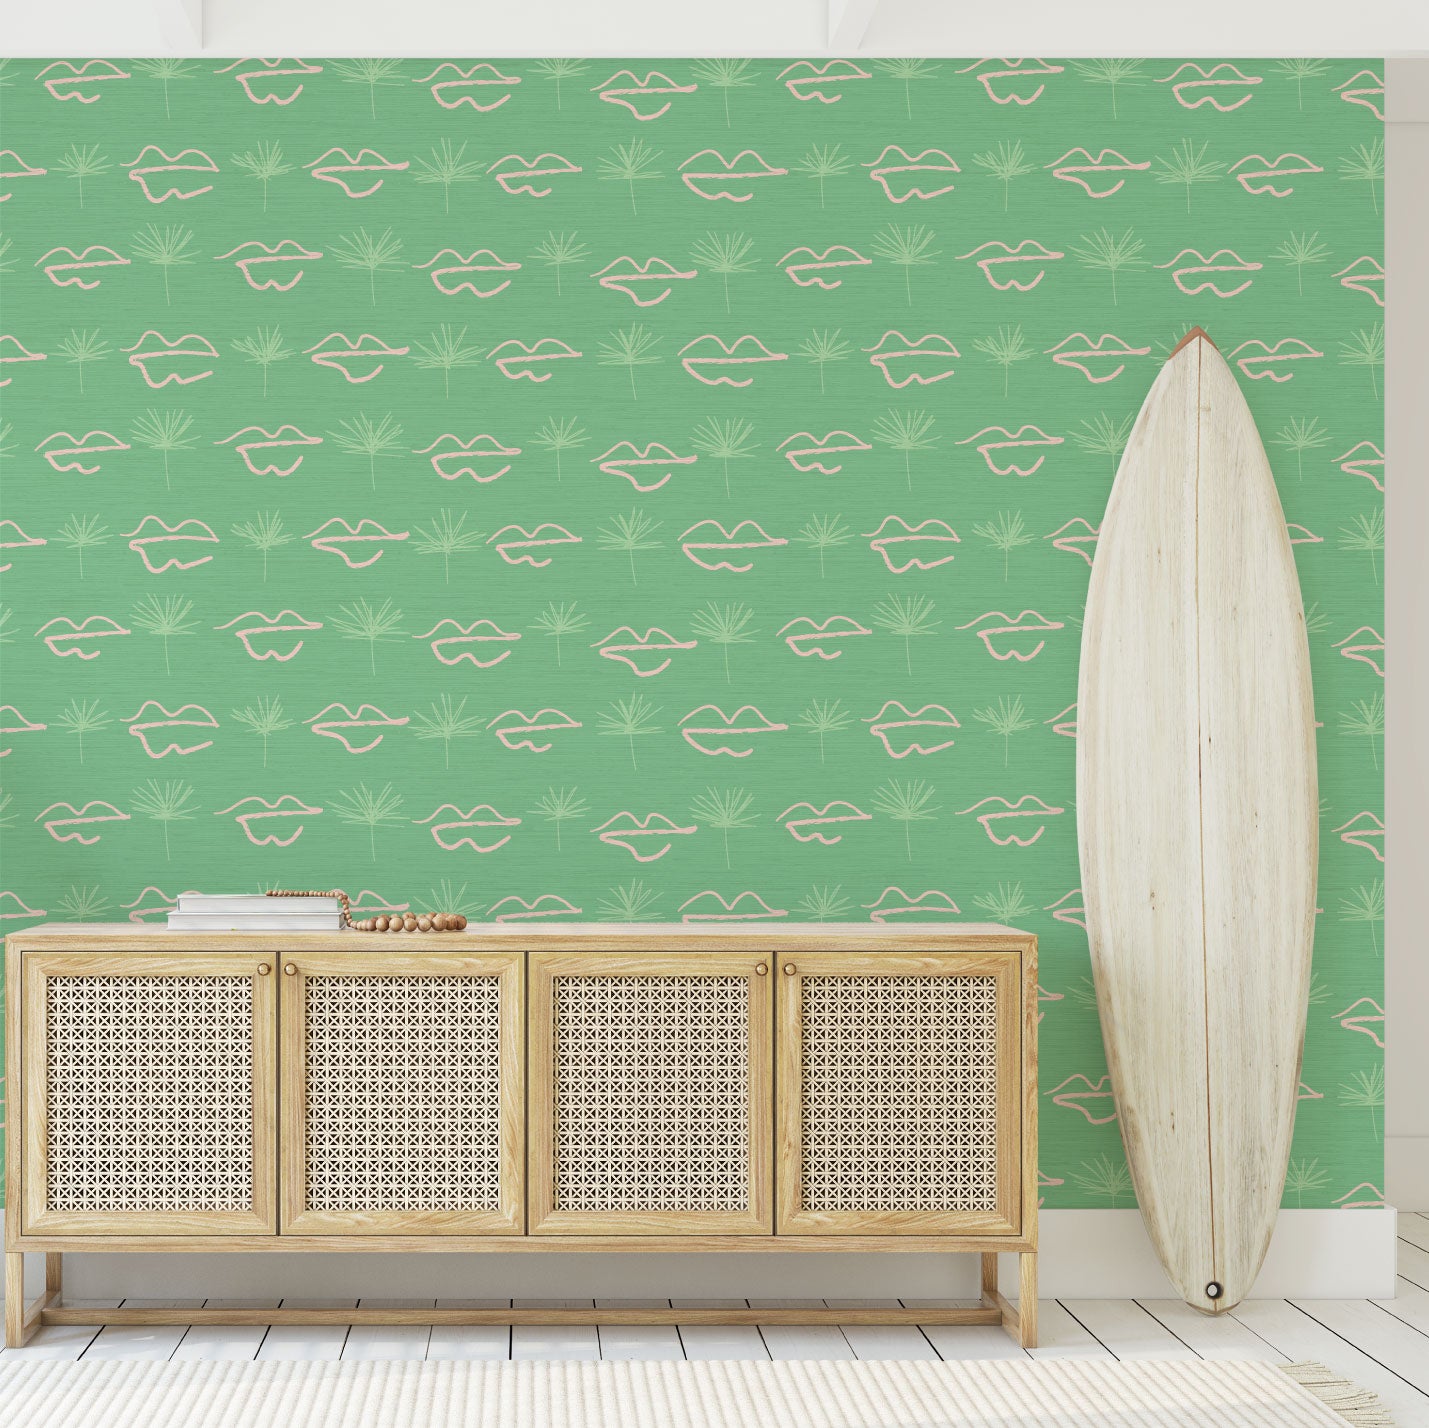 Grasscloth wallpaper Natural Textured Eco-Friendly Non-toxic High-quality Sustainable Interior Design Bold Custom Tailor-made Retro chic Bold Salon Beauty lips Botox jungle bold stripe lips jungle tropical makeup pink green teal palm tree entrance foyer surf